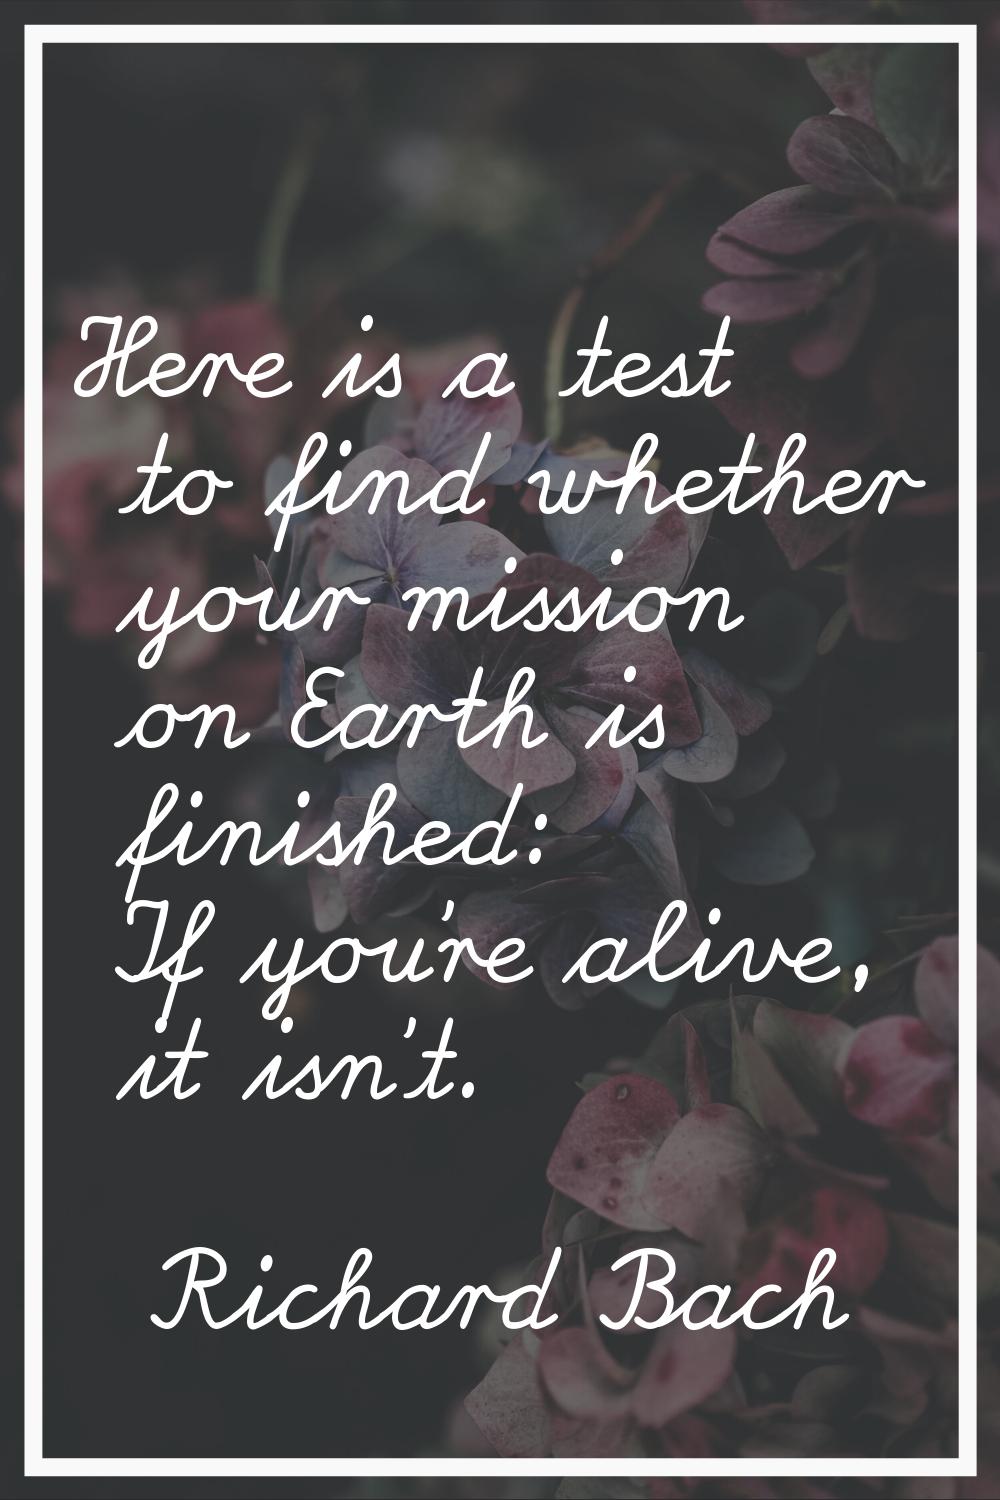 Here is a test to find whether your mission on Earth is finished: If you're alive, it isn't.